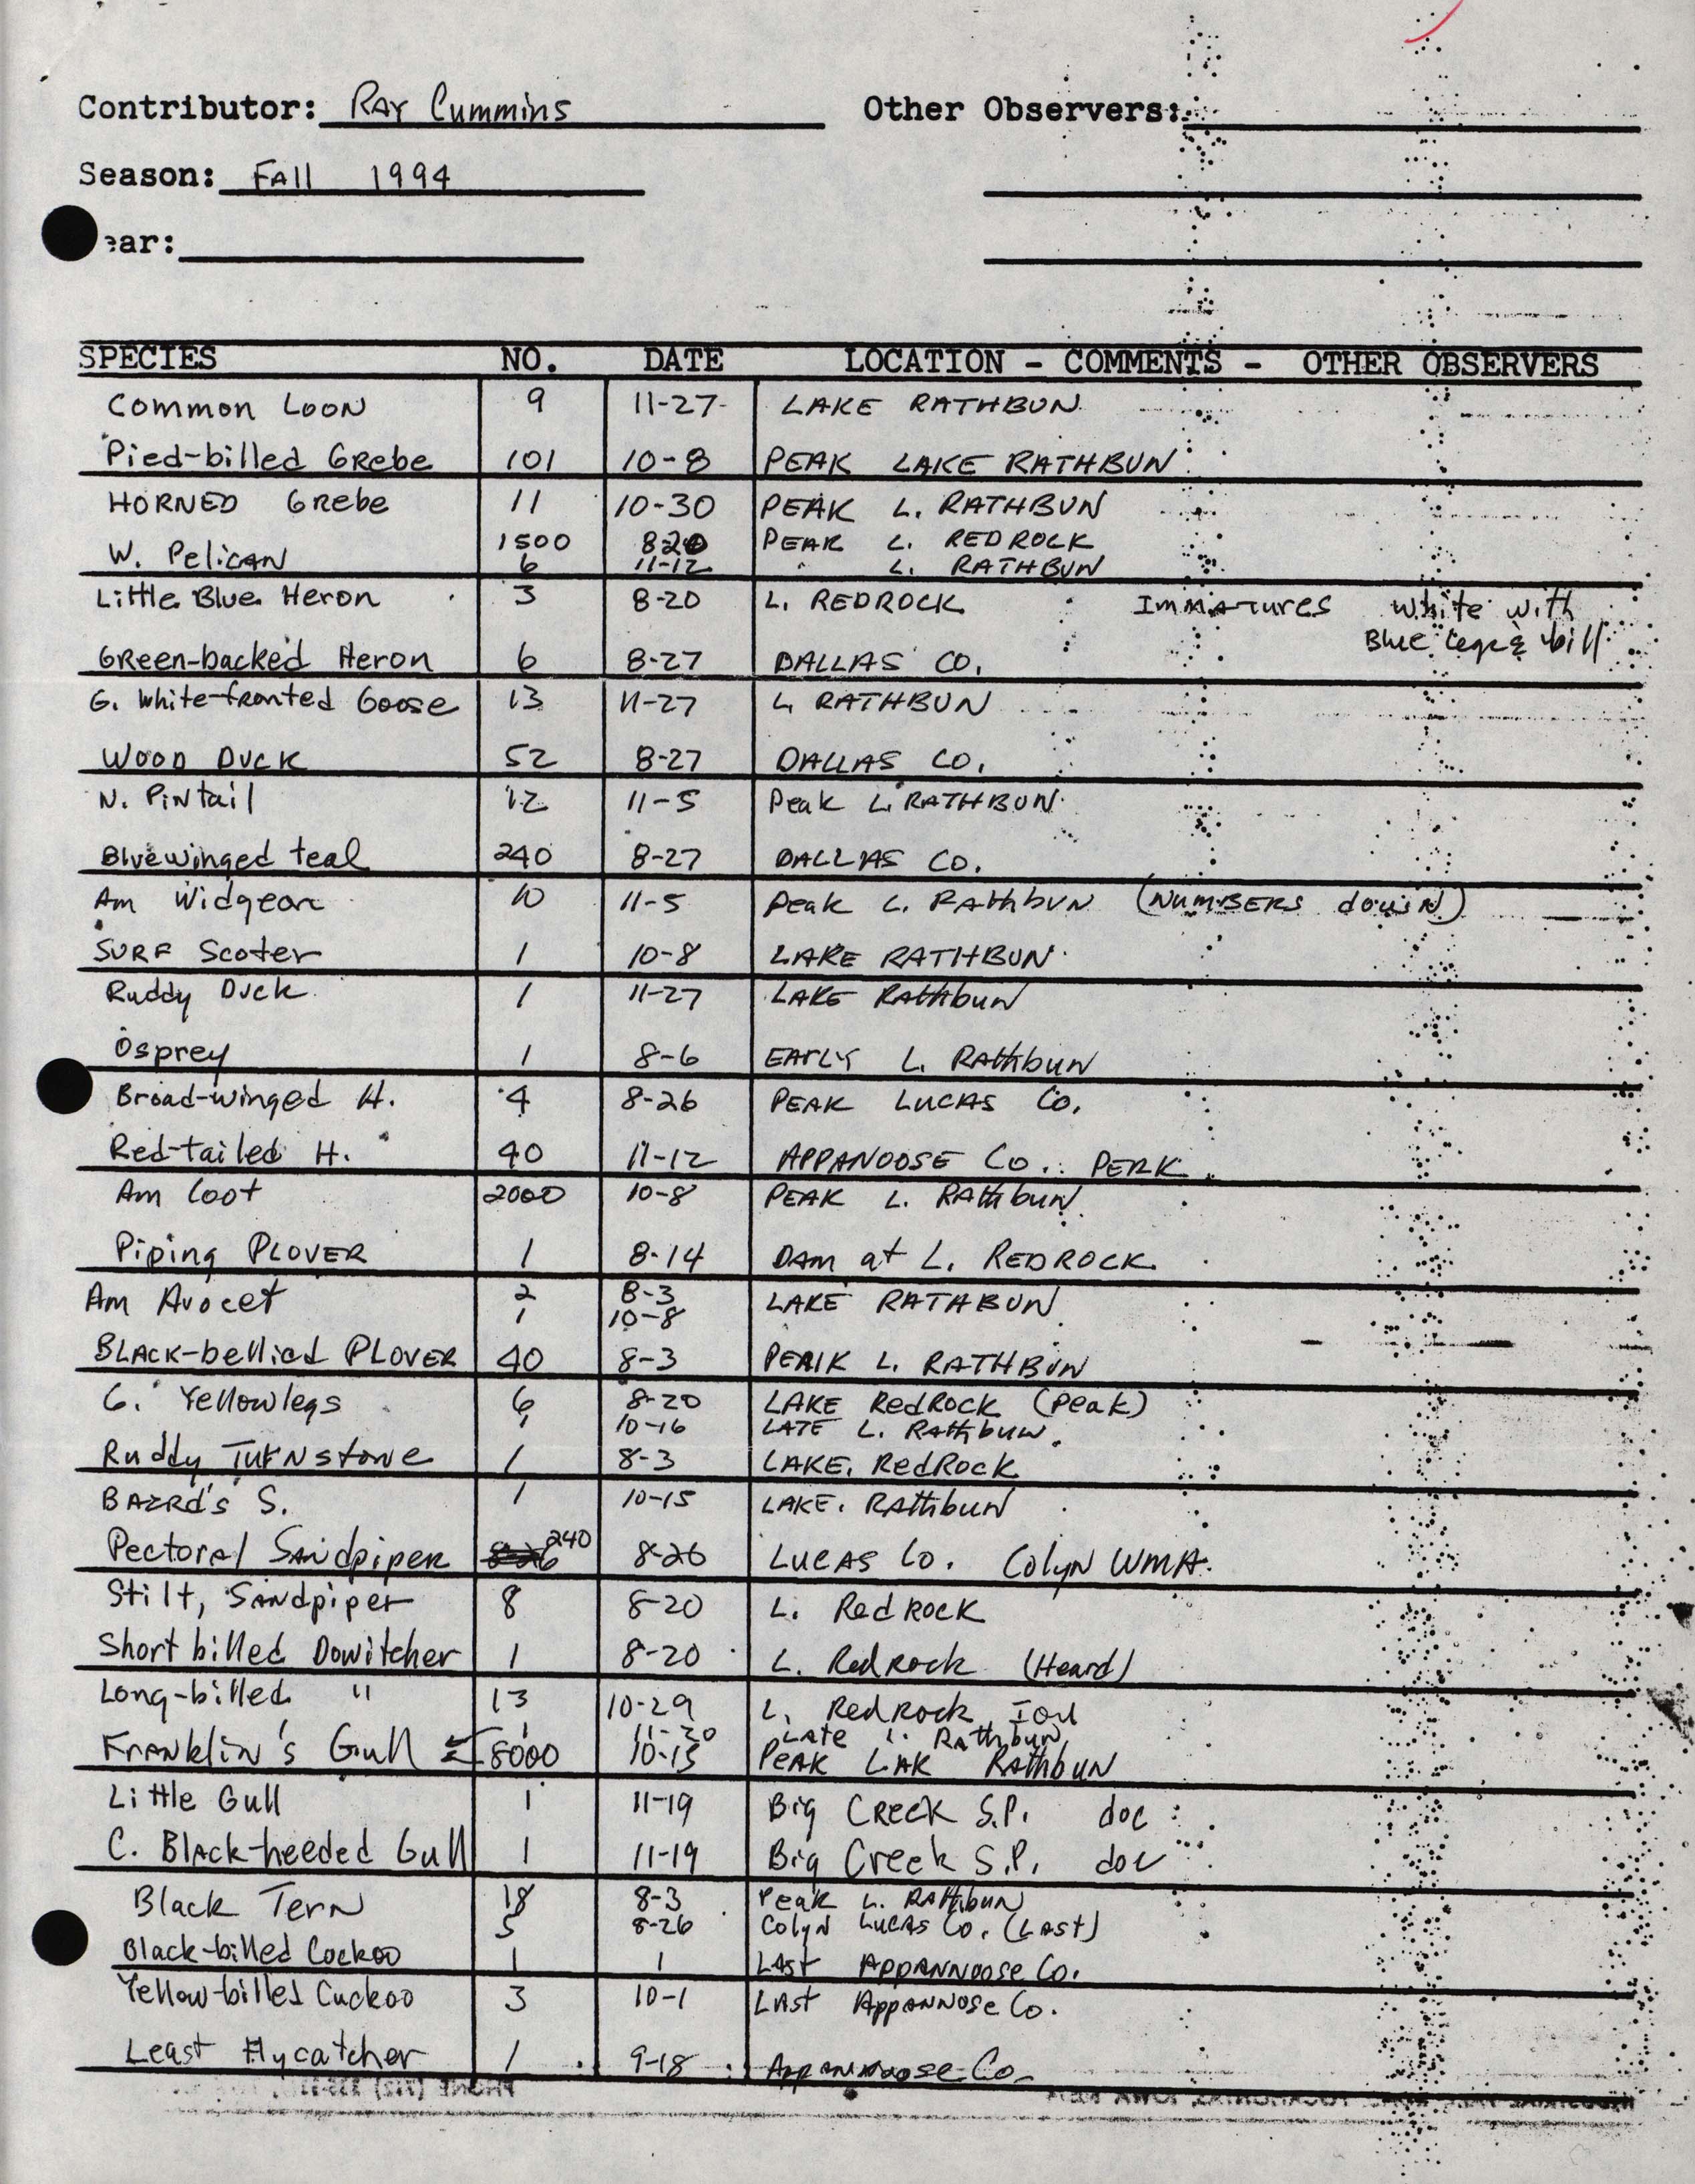 Annotated bird sighting list for fall 1994 compiled by Ray Cummins